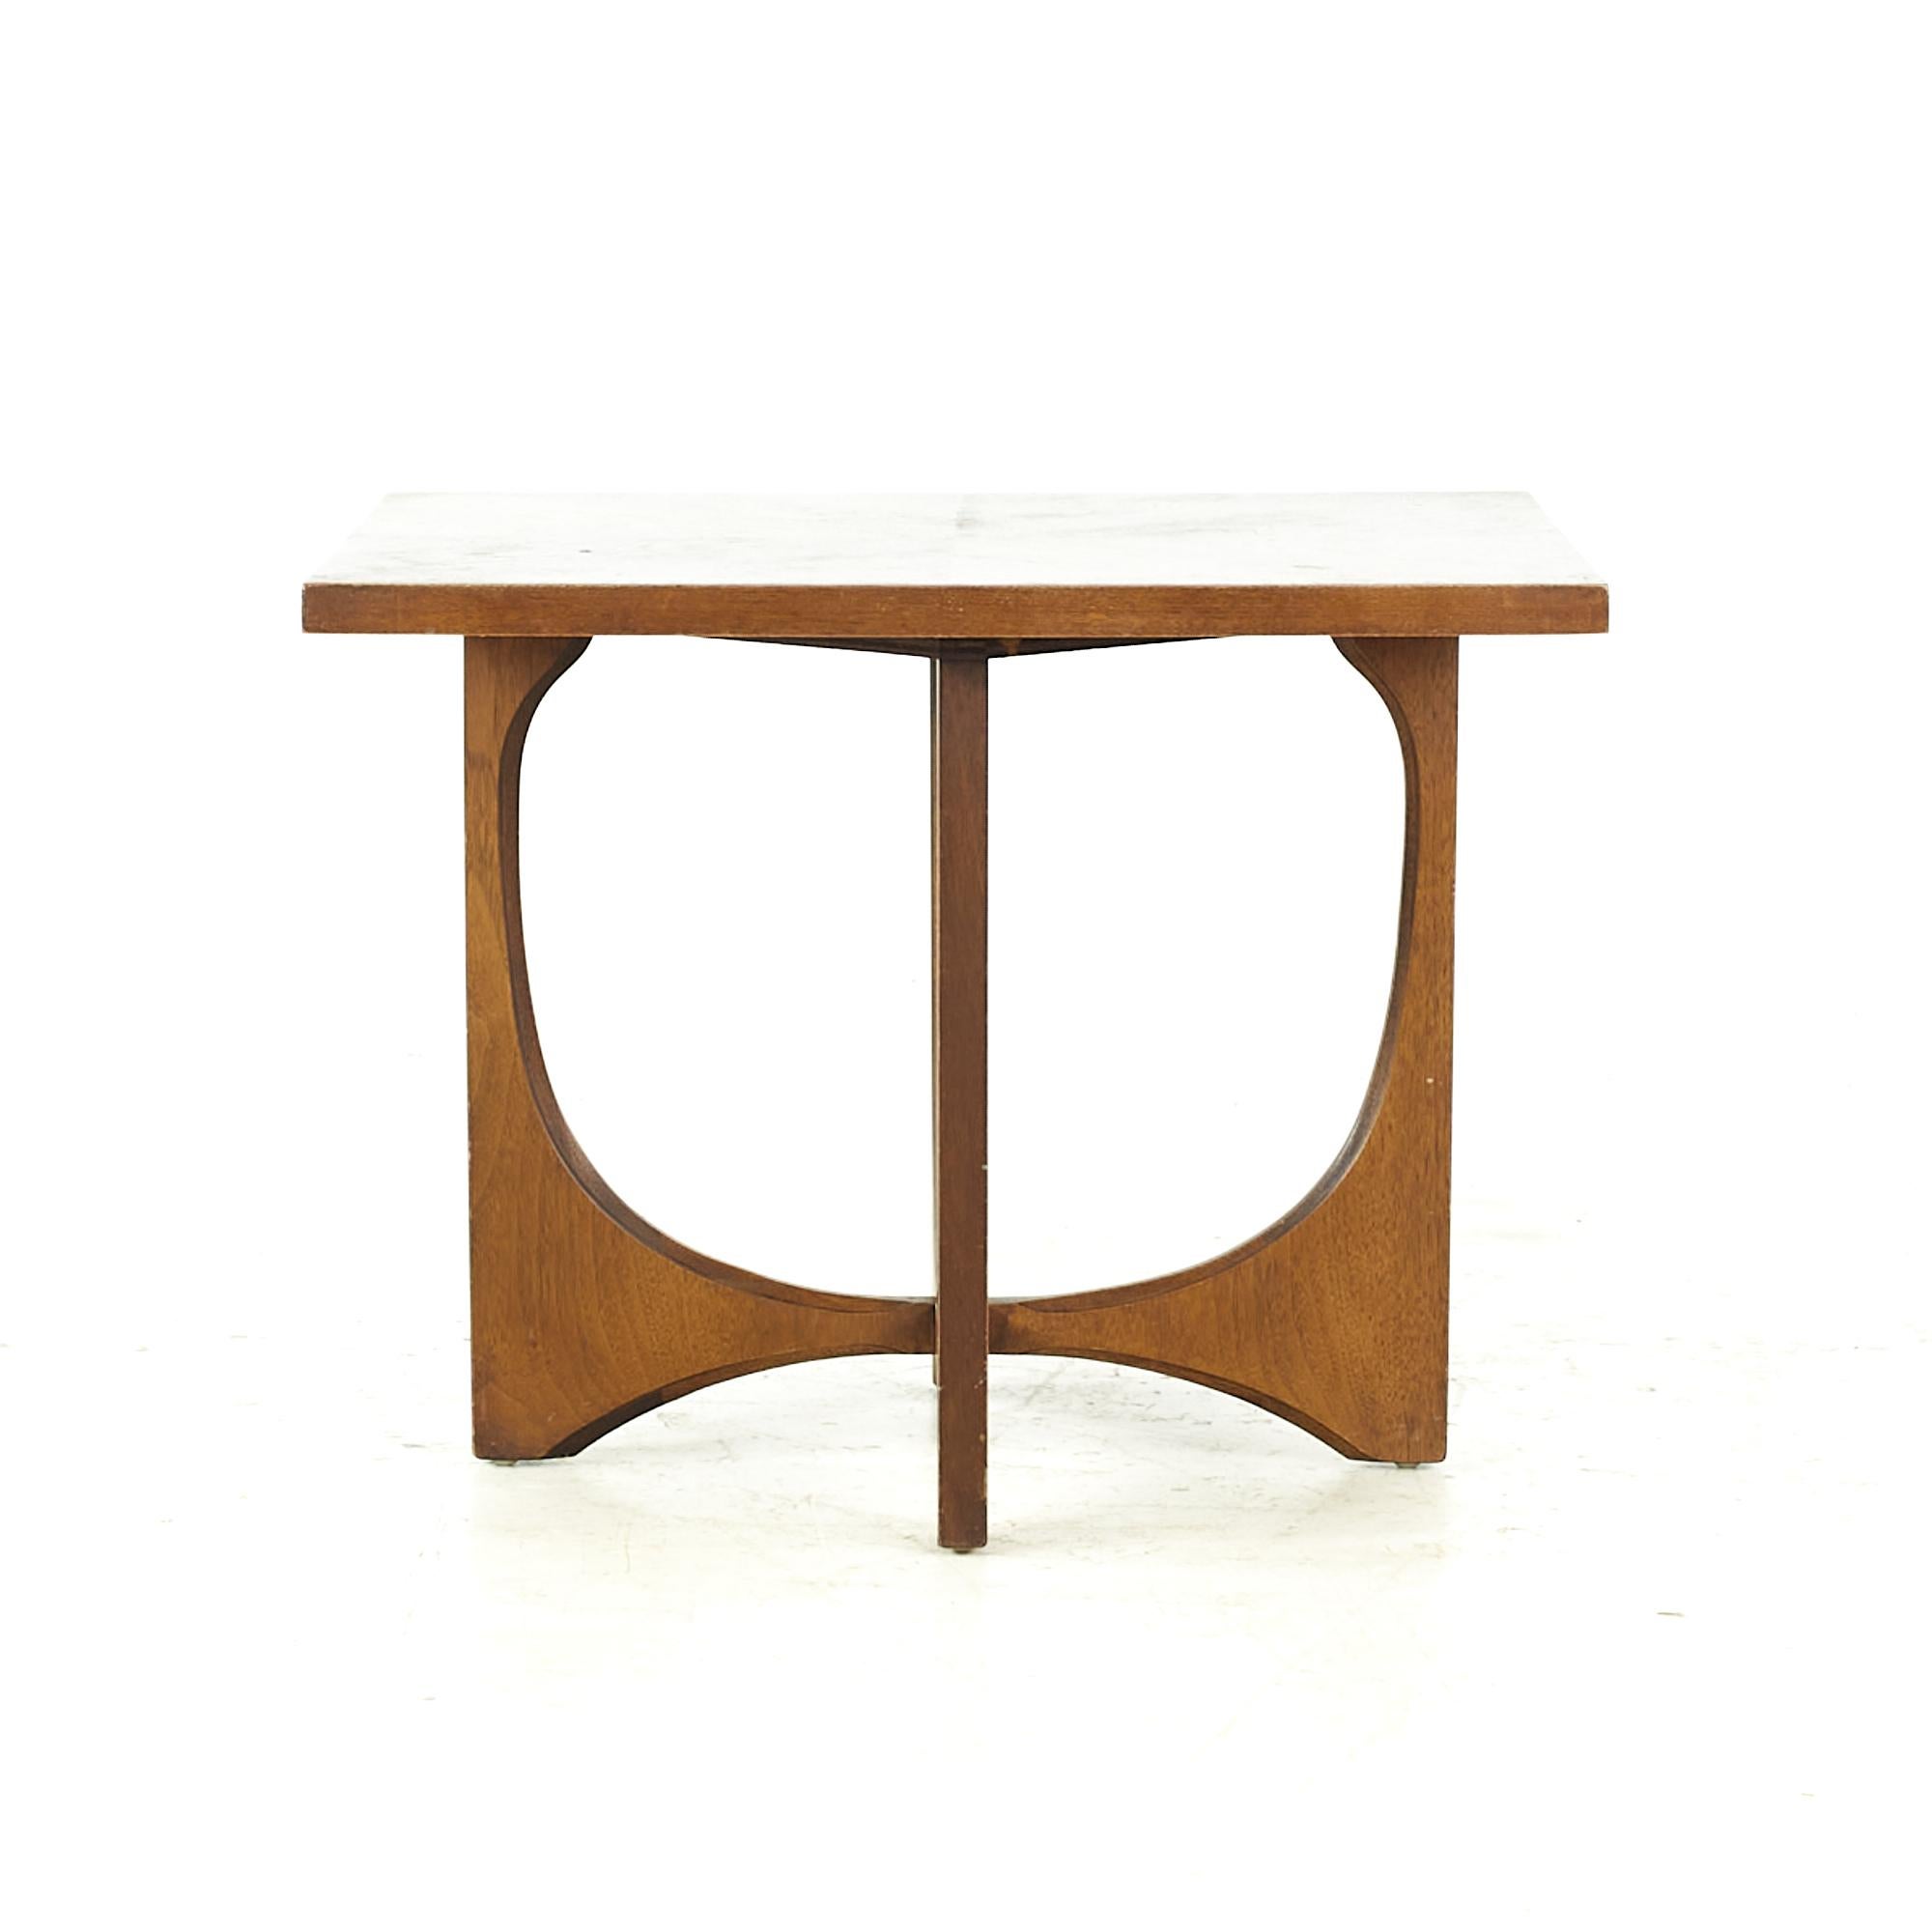 Broyhill Brasilia midcentury walnut square side table

This end table measures: 26 wide x 26 deep x 20 inches high

All pieces of furniture can be had in what we call restored vintage condition. That means the piece is restored upon purchase so